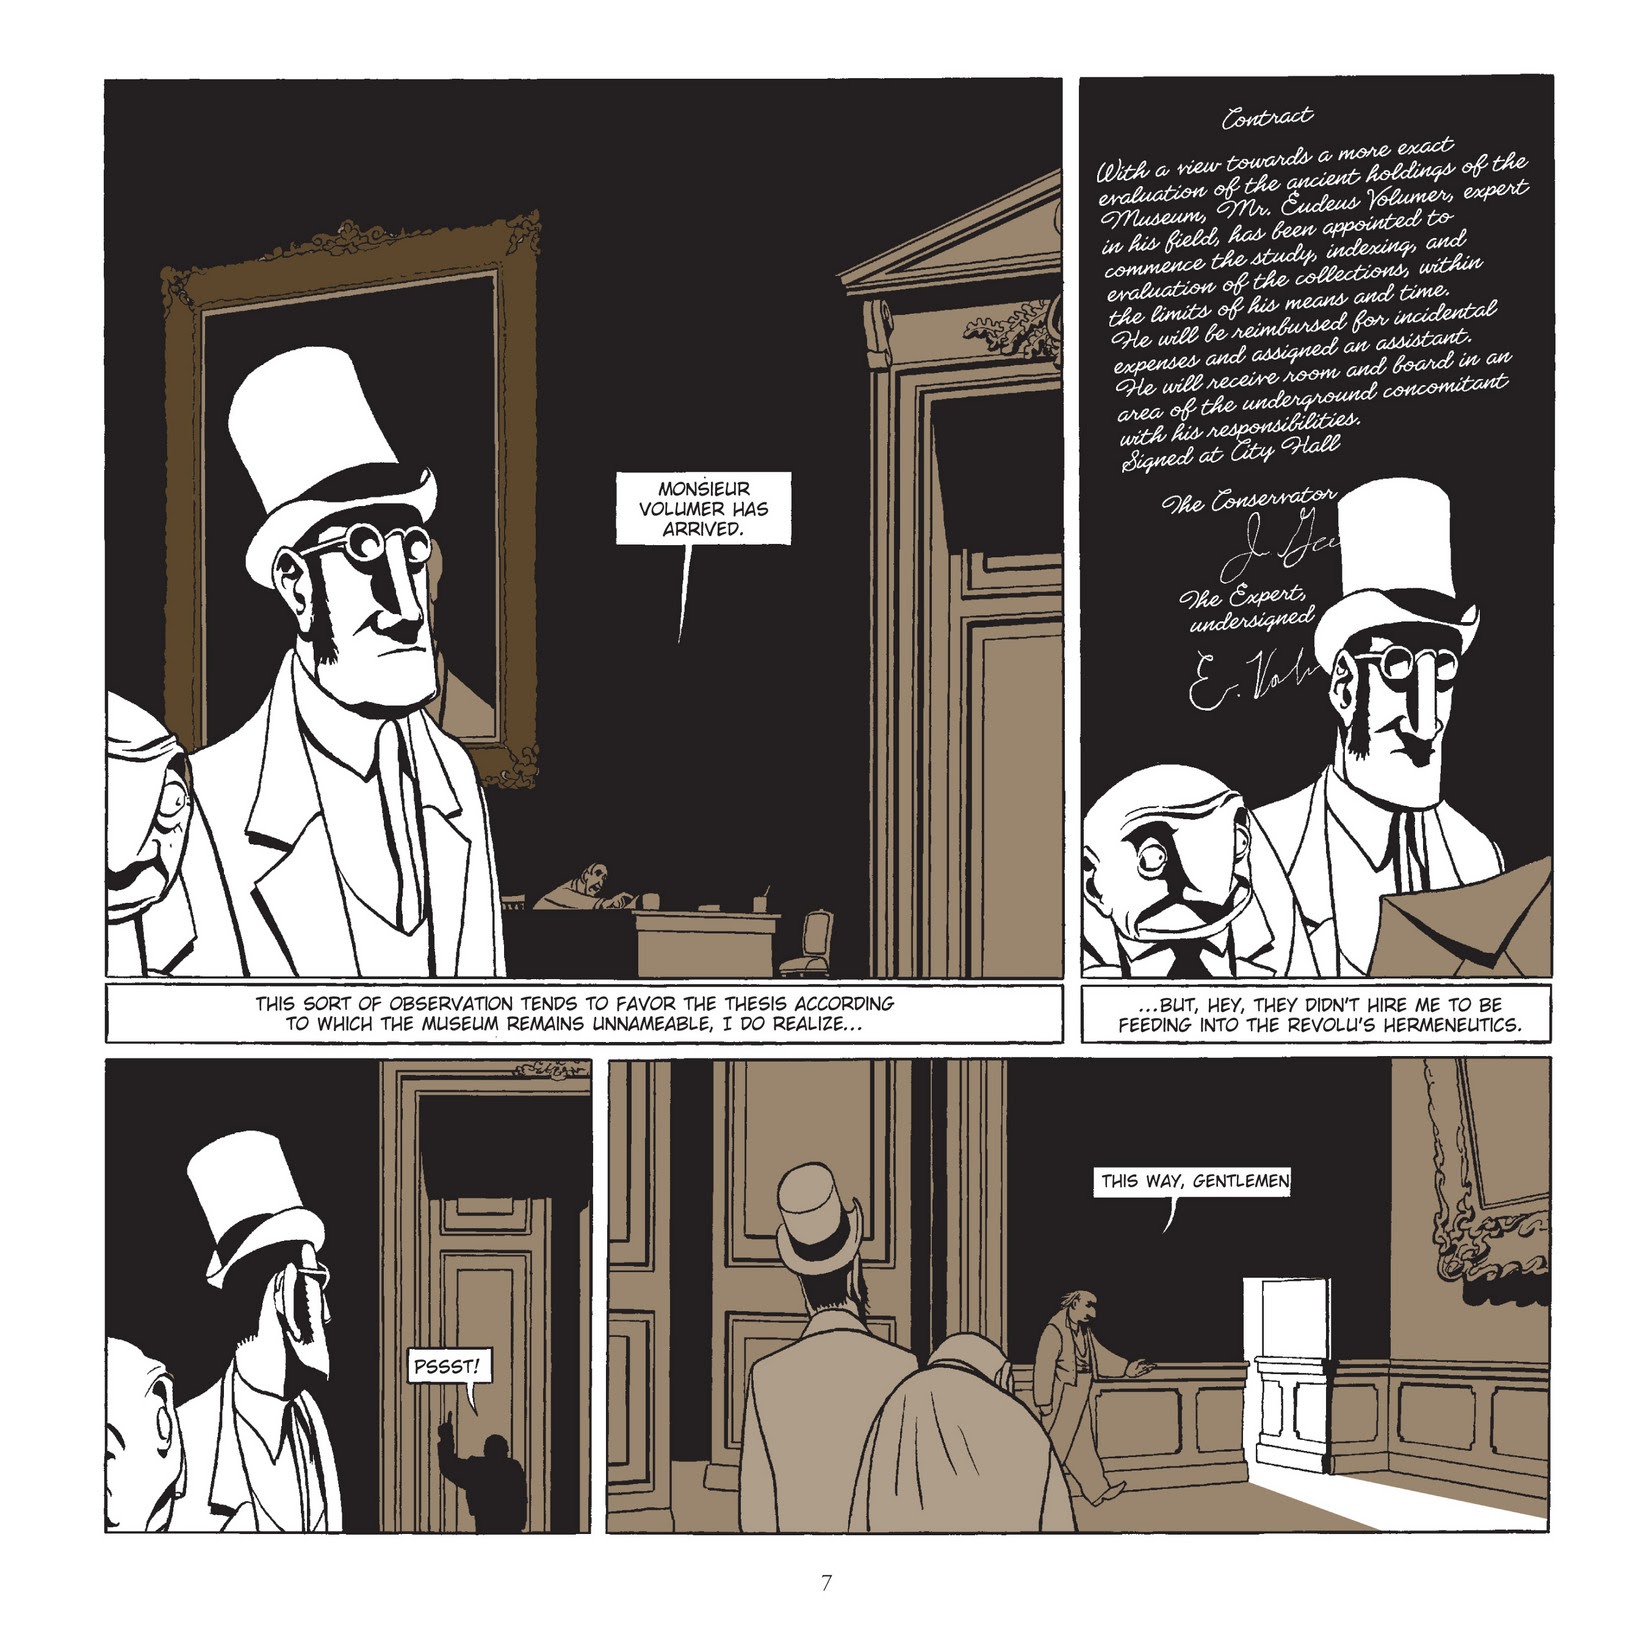 Read online Museum Vaults: Excerpts from the Journal of an Expert comic -  Issue # Full - 8